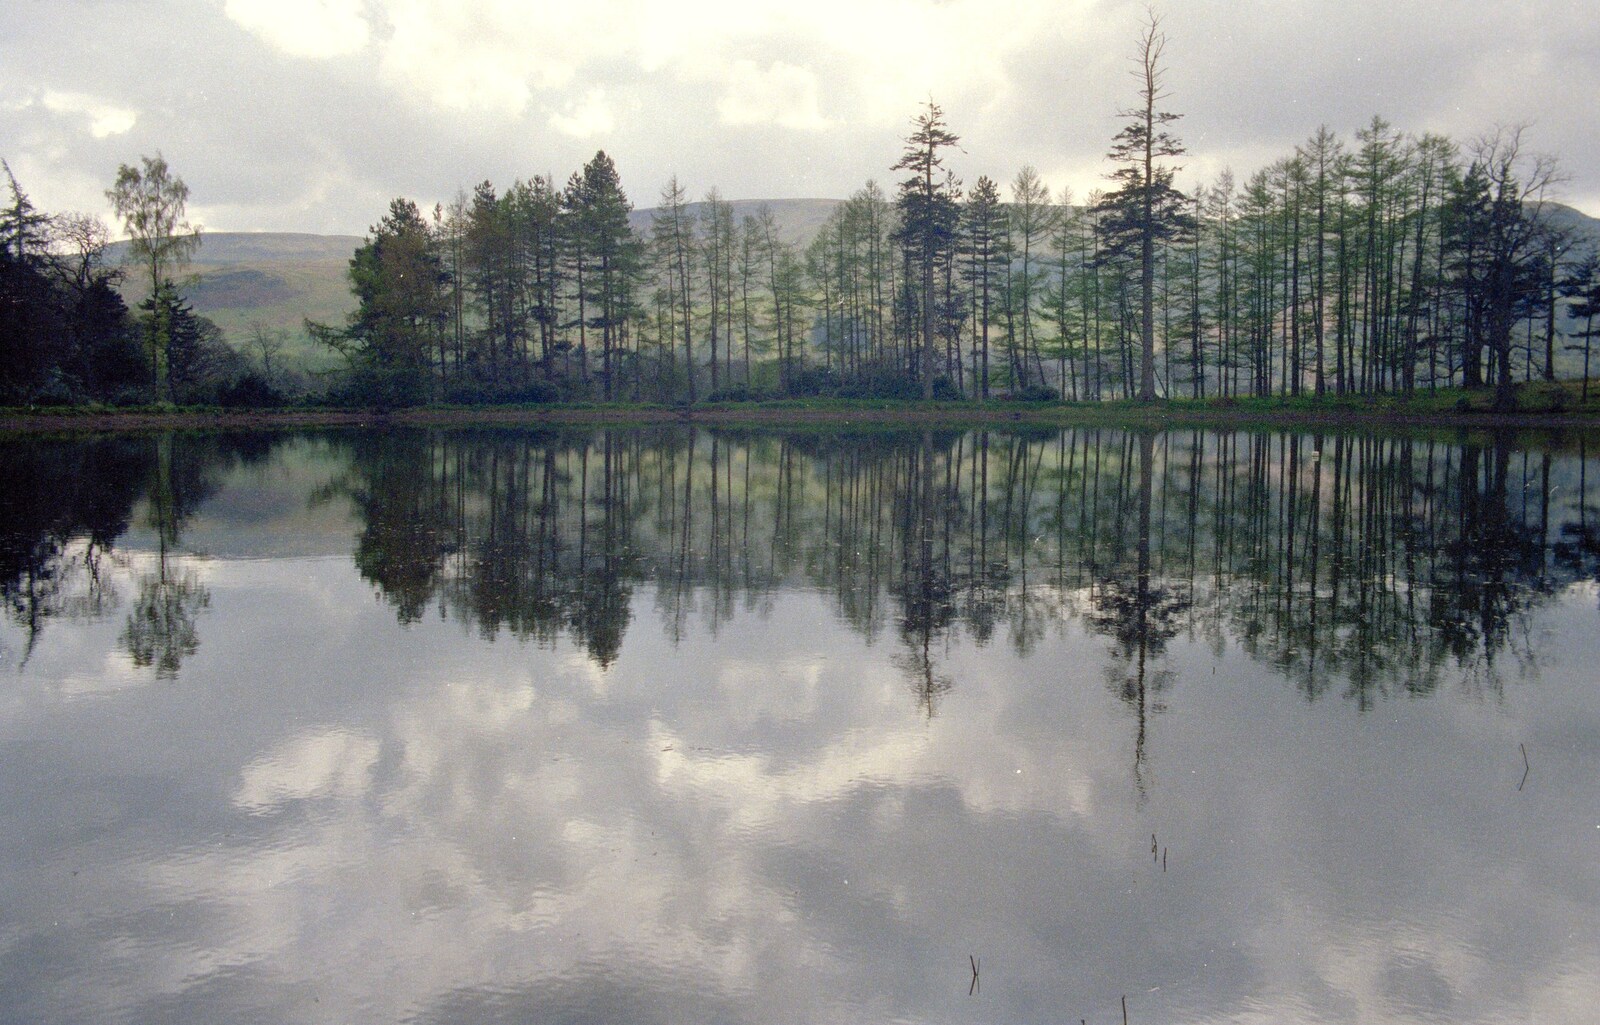 Uni: A Trip To Glasgow and Edinburgh, Scotland - 15th May 1989: Reflected trees in a lake